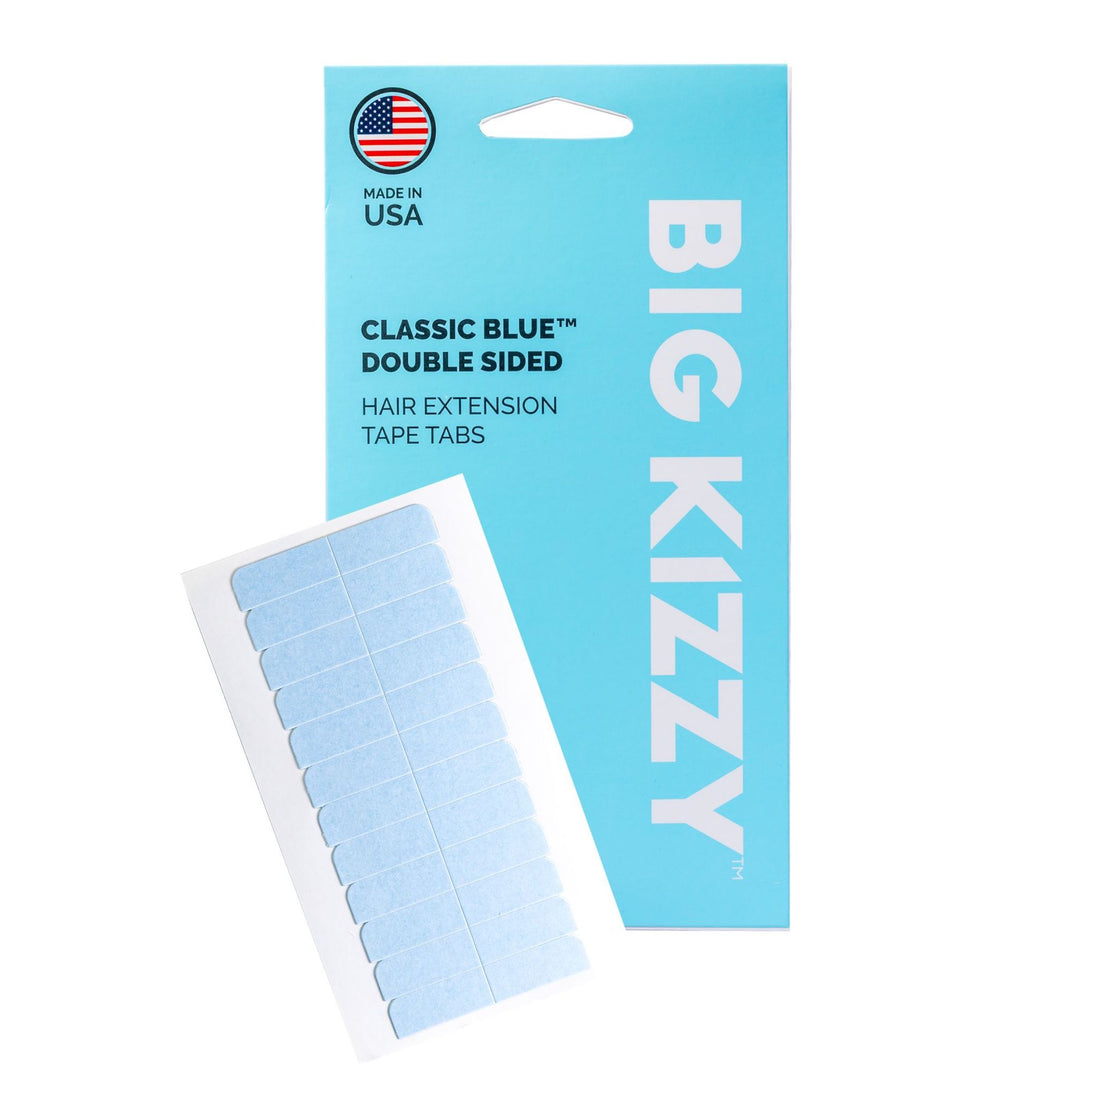 Big Kizzy® Classic Blue Double Sided Hair Extension Replacement Tape Tabs Packaging with a blue tape tab sheet overlayed on top of it